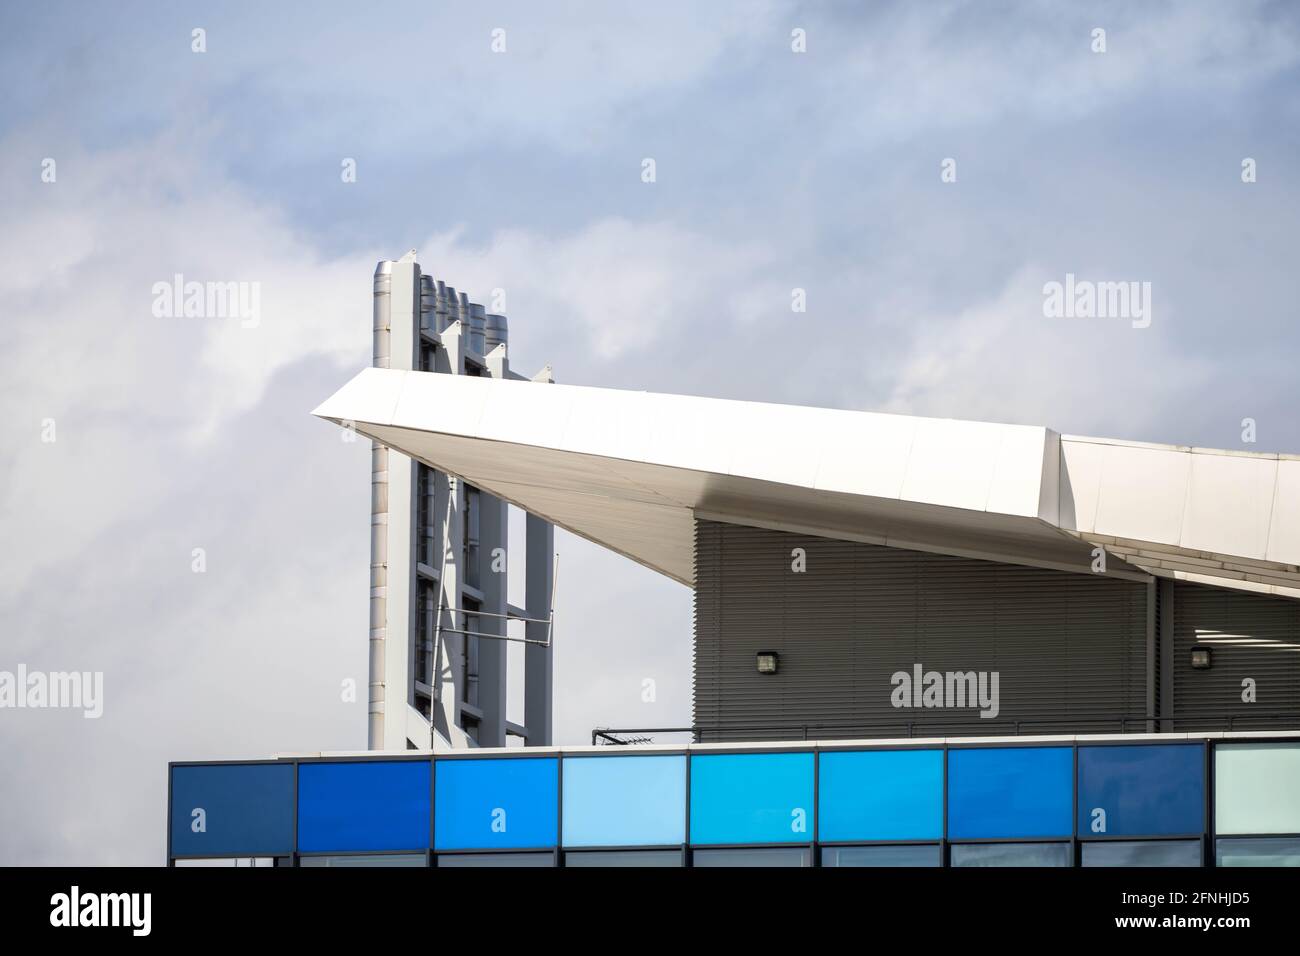 Modern urban architecture blue and aqua building angled roofline with chrome stainless steel chimneys reaching to the cloudy blue sky. Stock Photo